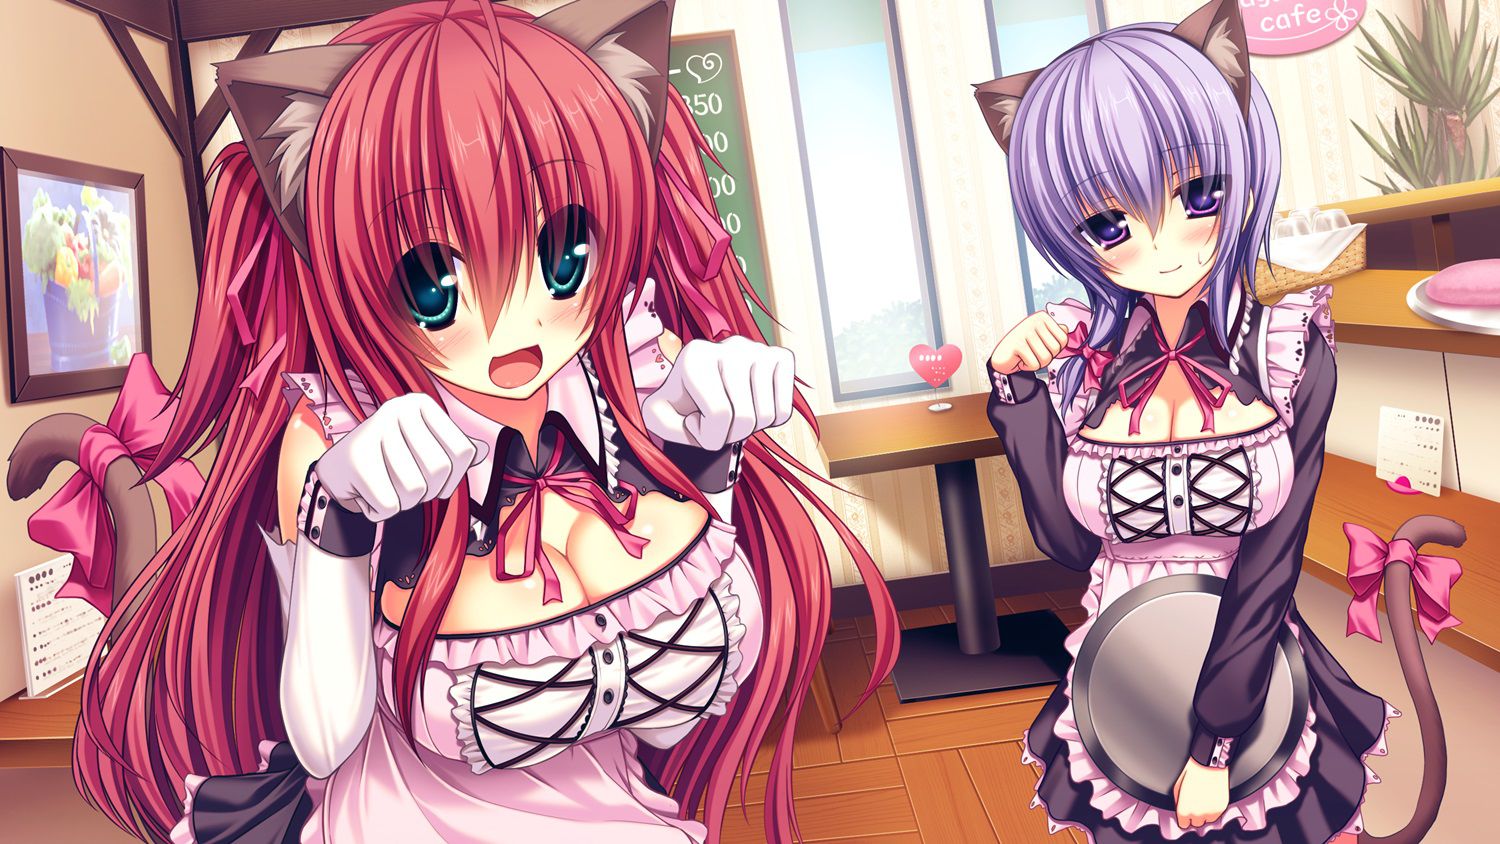 Namickideration [under age 18 prohibited eroge CG] wallpapers, images 10